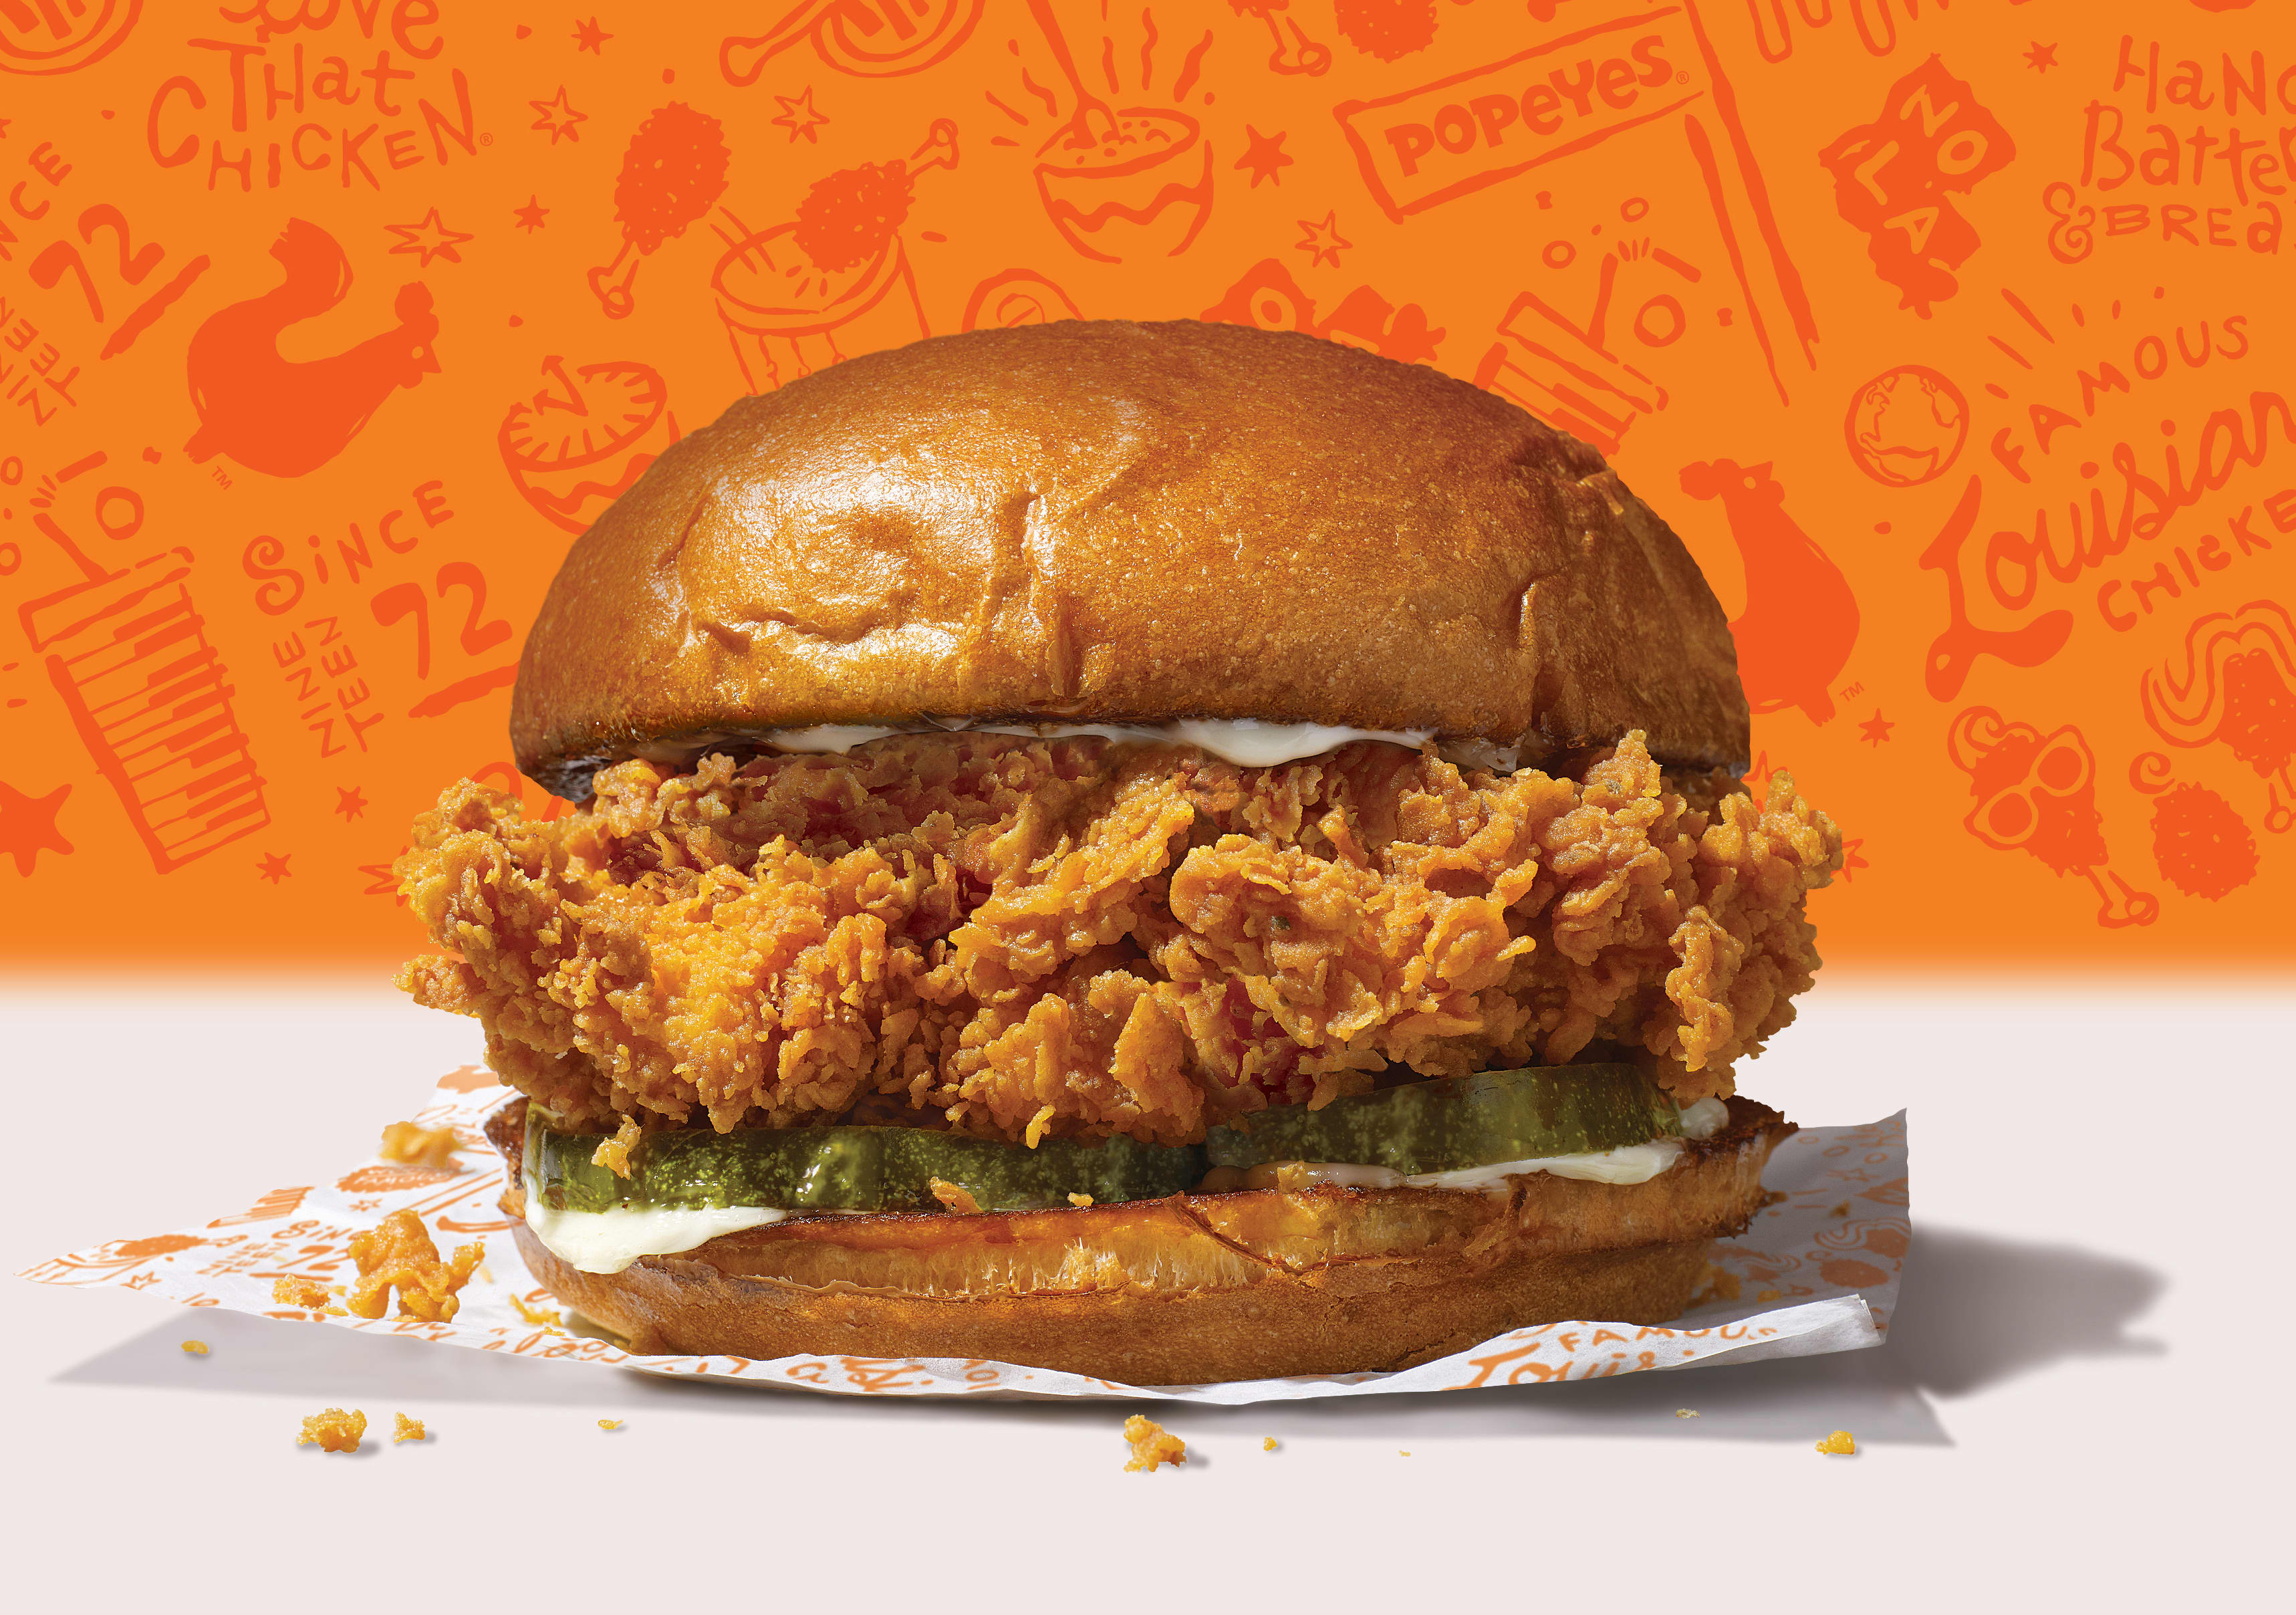 man-killed-at-maryland-popeyes-in-fight-linked-to-popular-chicken-sandwich